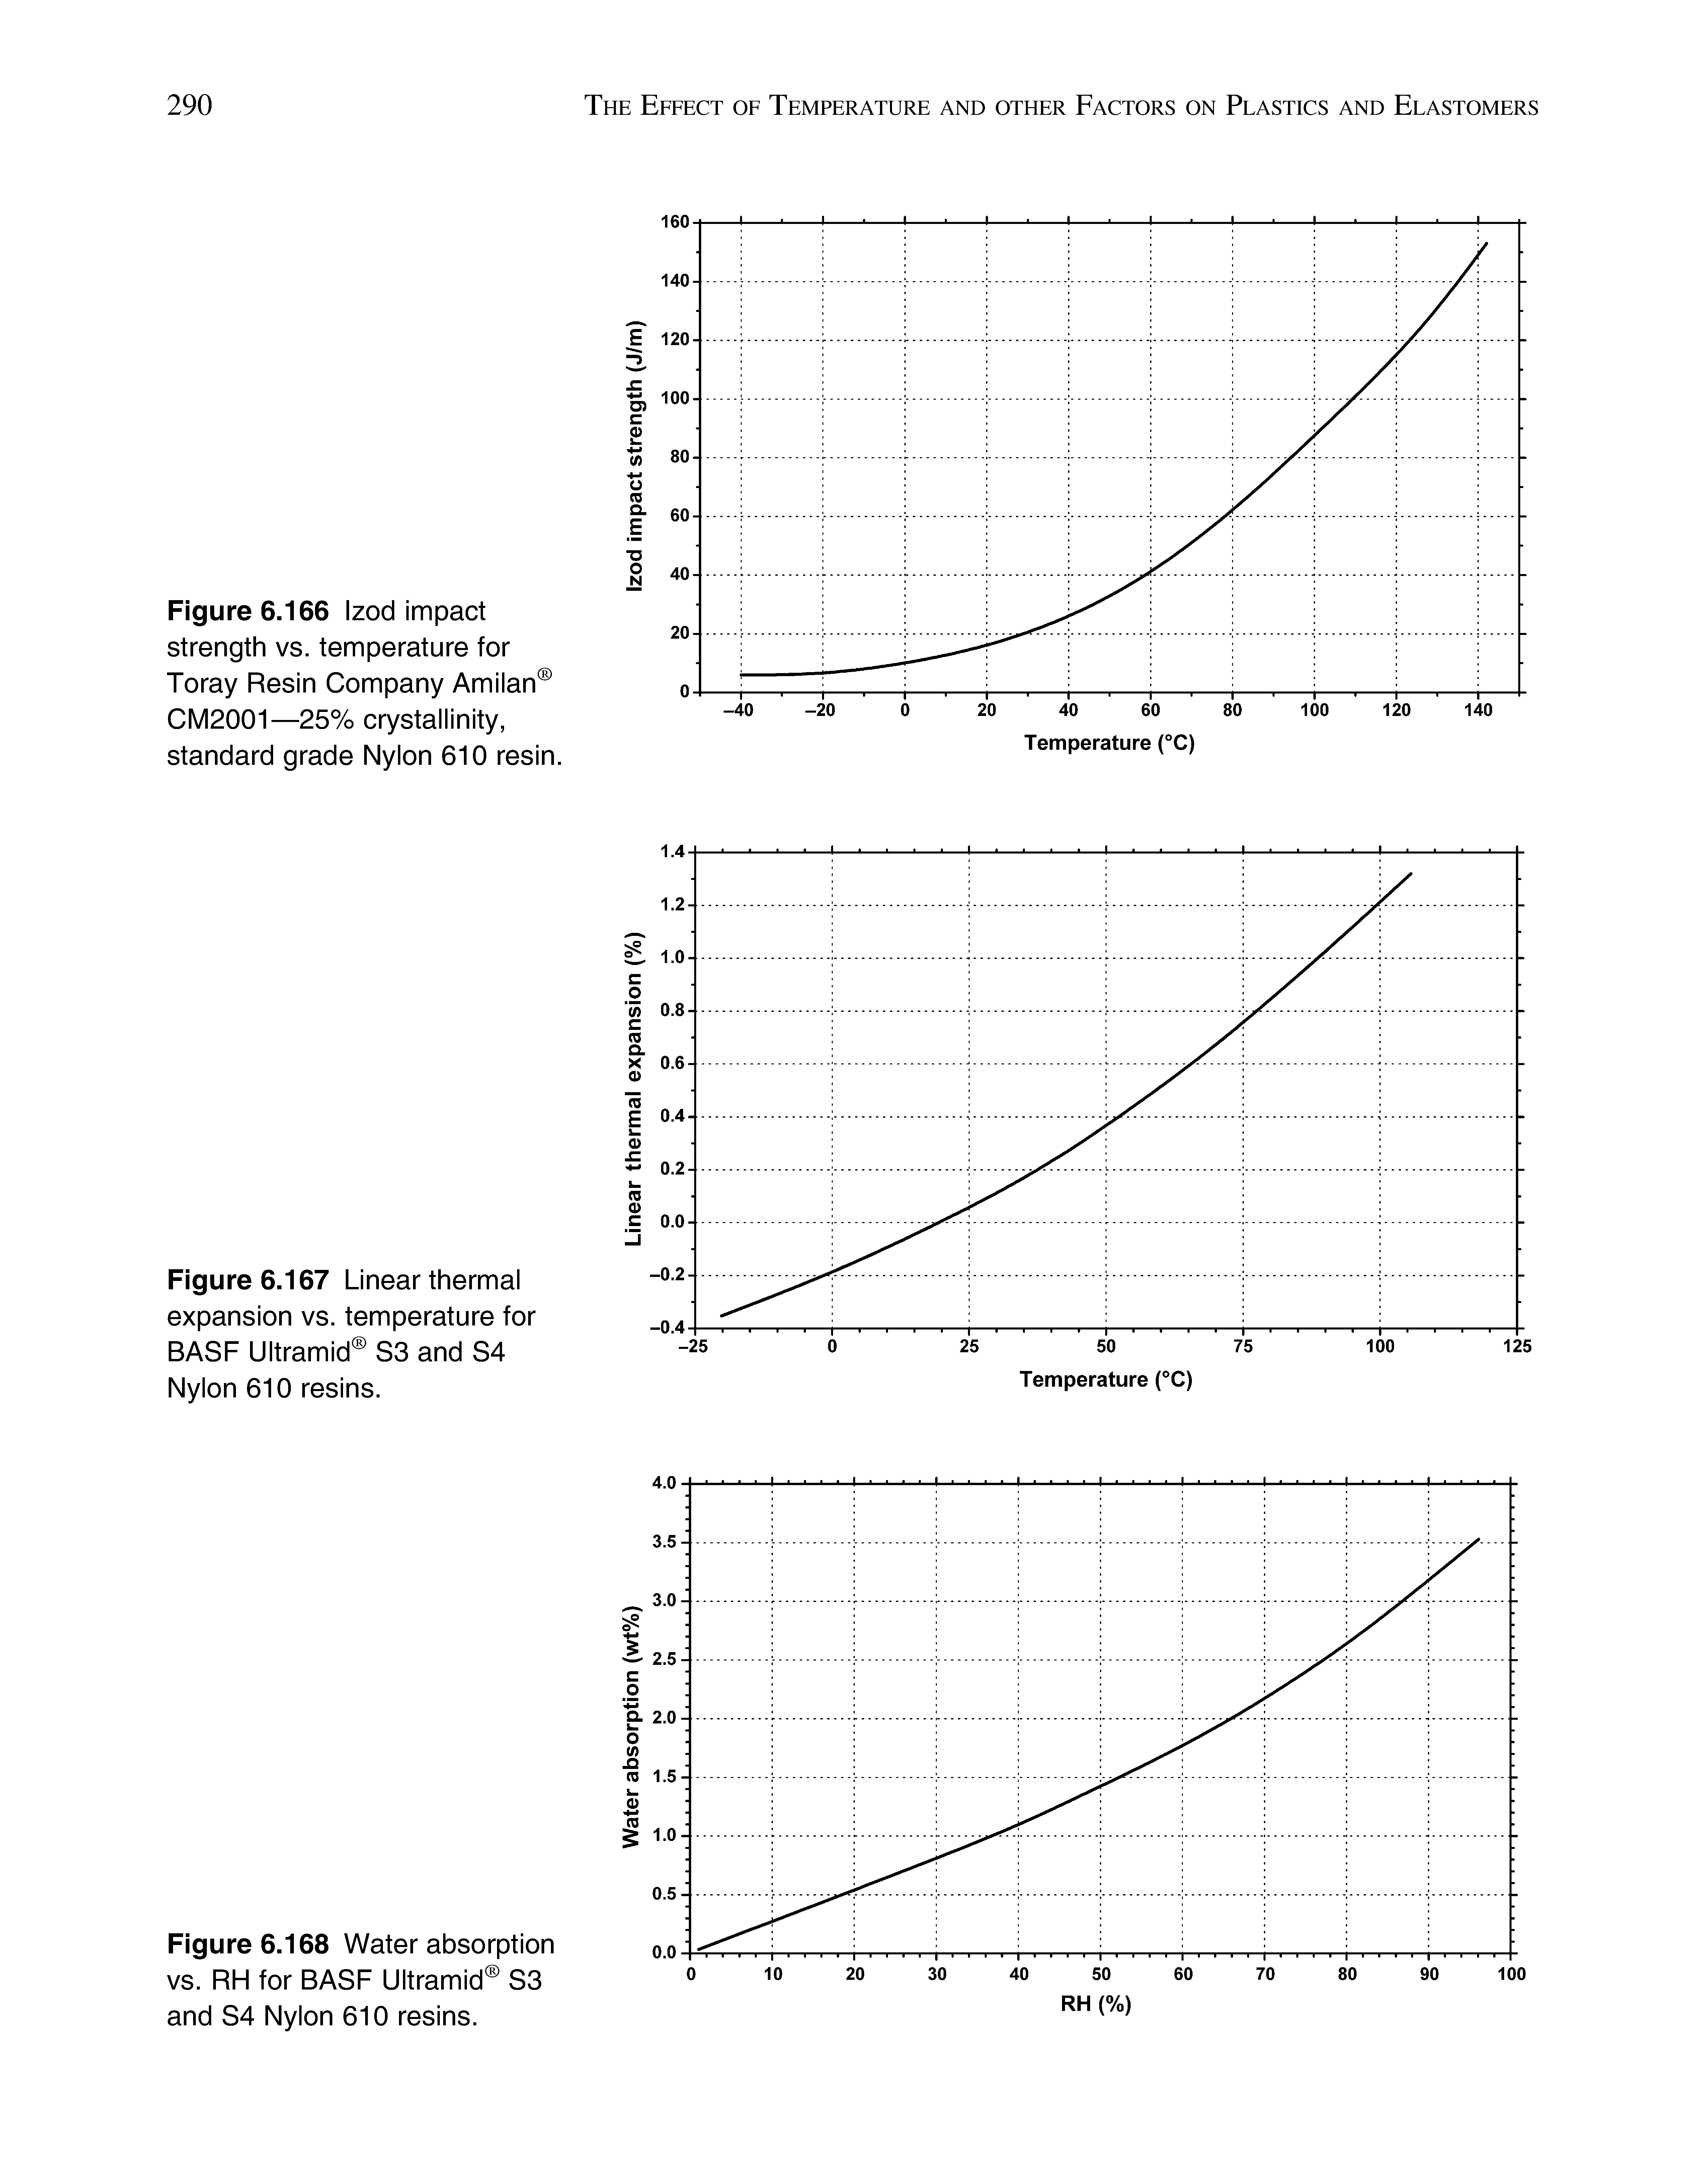 Figure 6.167 Linear thermal expansion vs. temperature for BASF Ultramid S3 and S4 Nylon 610 resins.